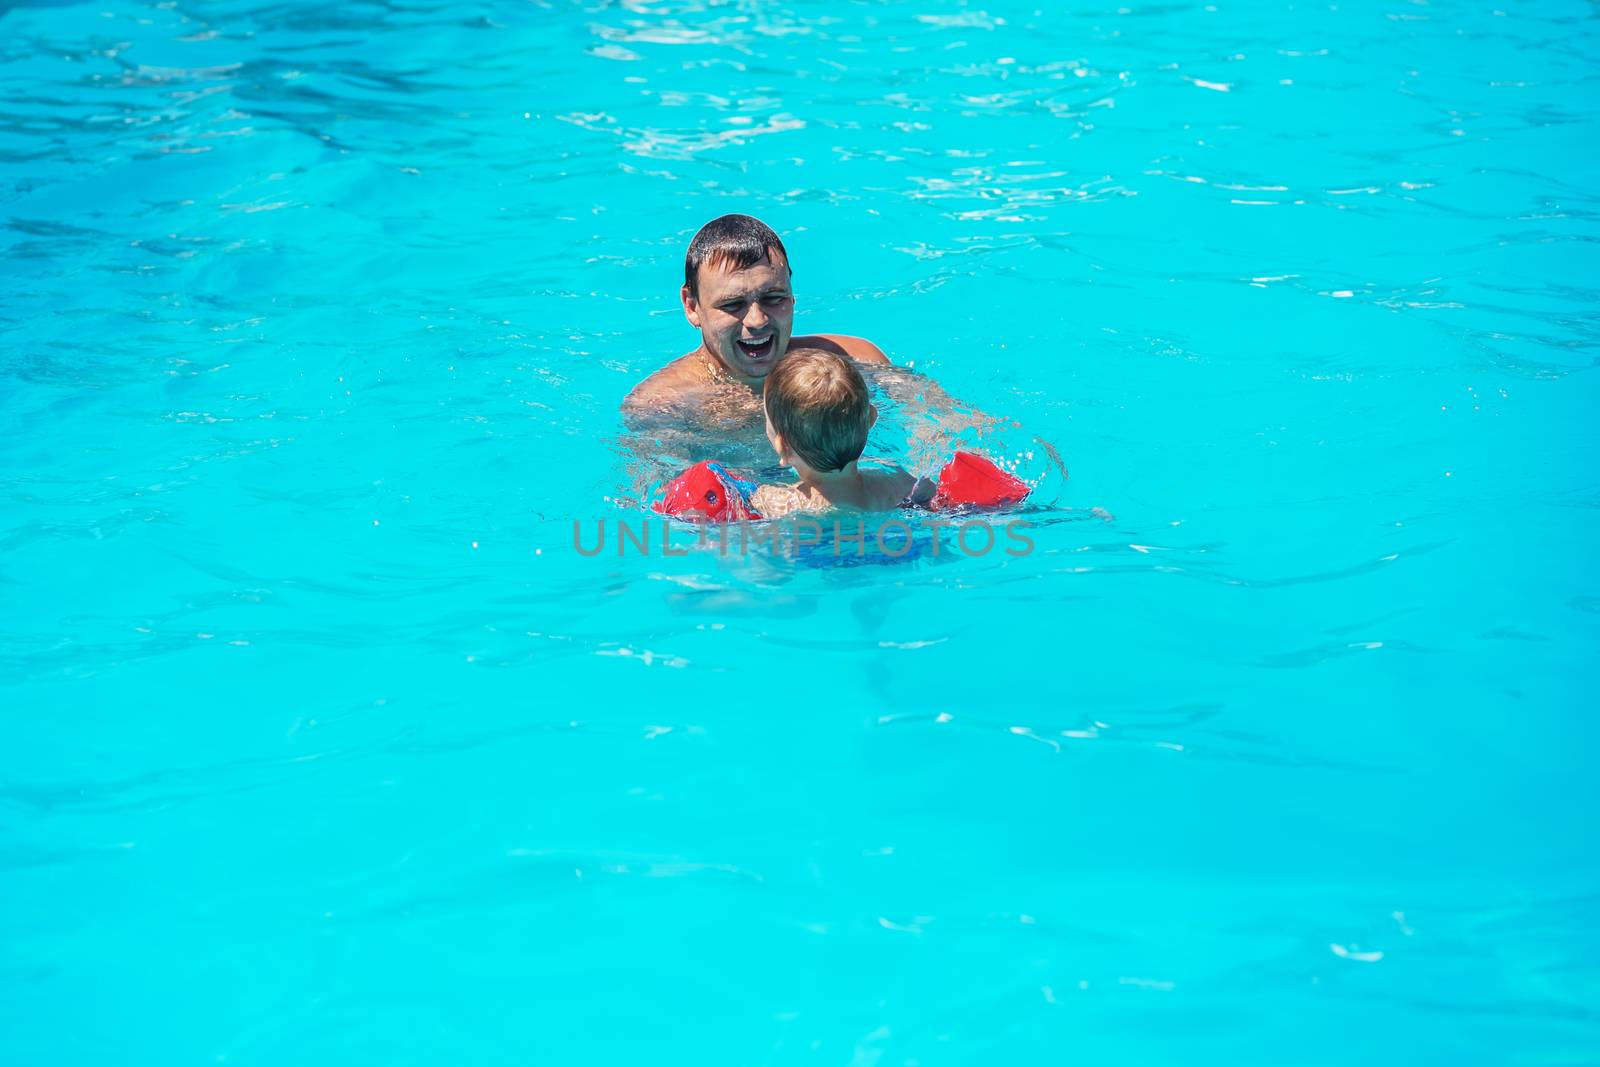 Dad and son swimming together in the pool. Happy family playing in blue water of swimming pool. Kid learning to swim. Summer vacations concept. Dad and son having fun in swim pool